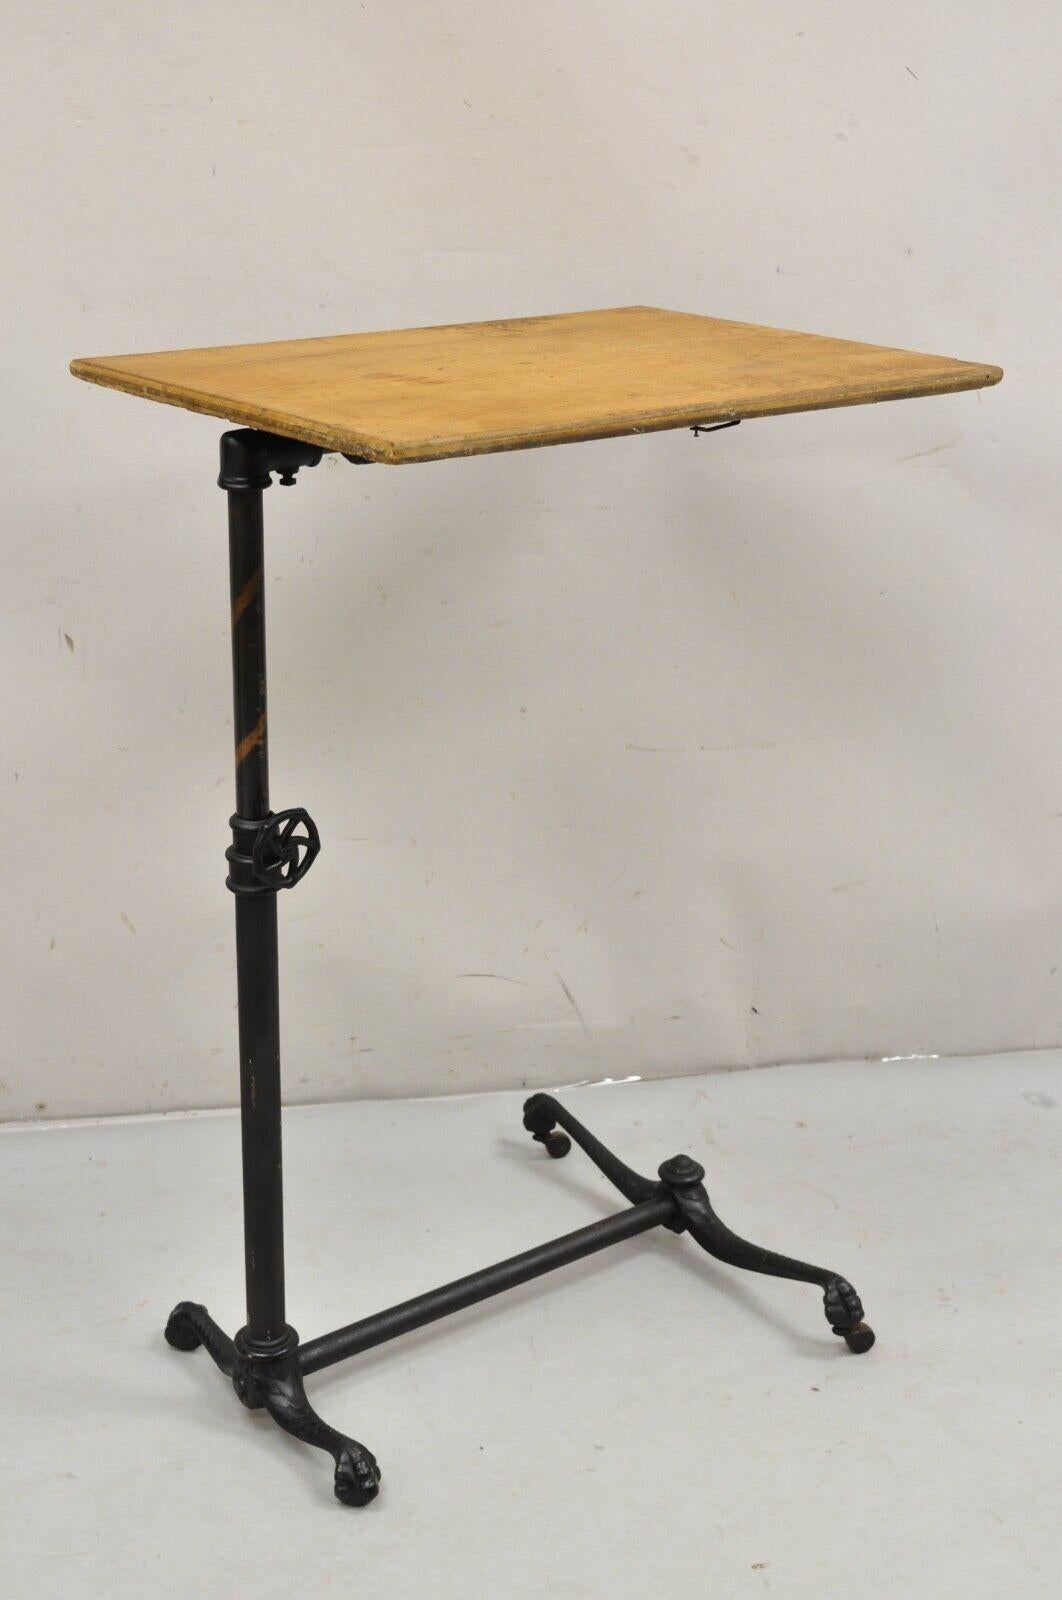 Antique Victorian Cast Iron Adjustable Small Surgical Drafting Table w/ Oak Top. Item featured is a nice small size, cast iron base with paw feet on rolling casters, adjustable height with iron knob, tilting top with very unique spring and toothed